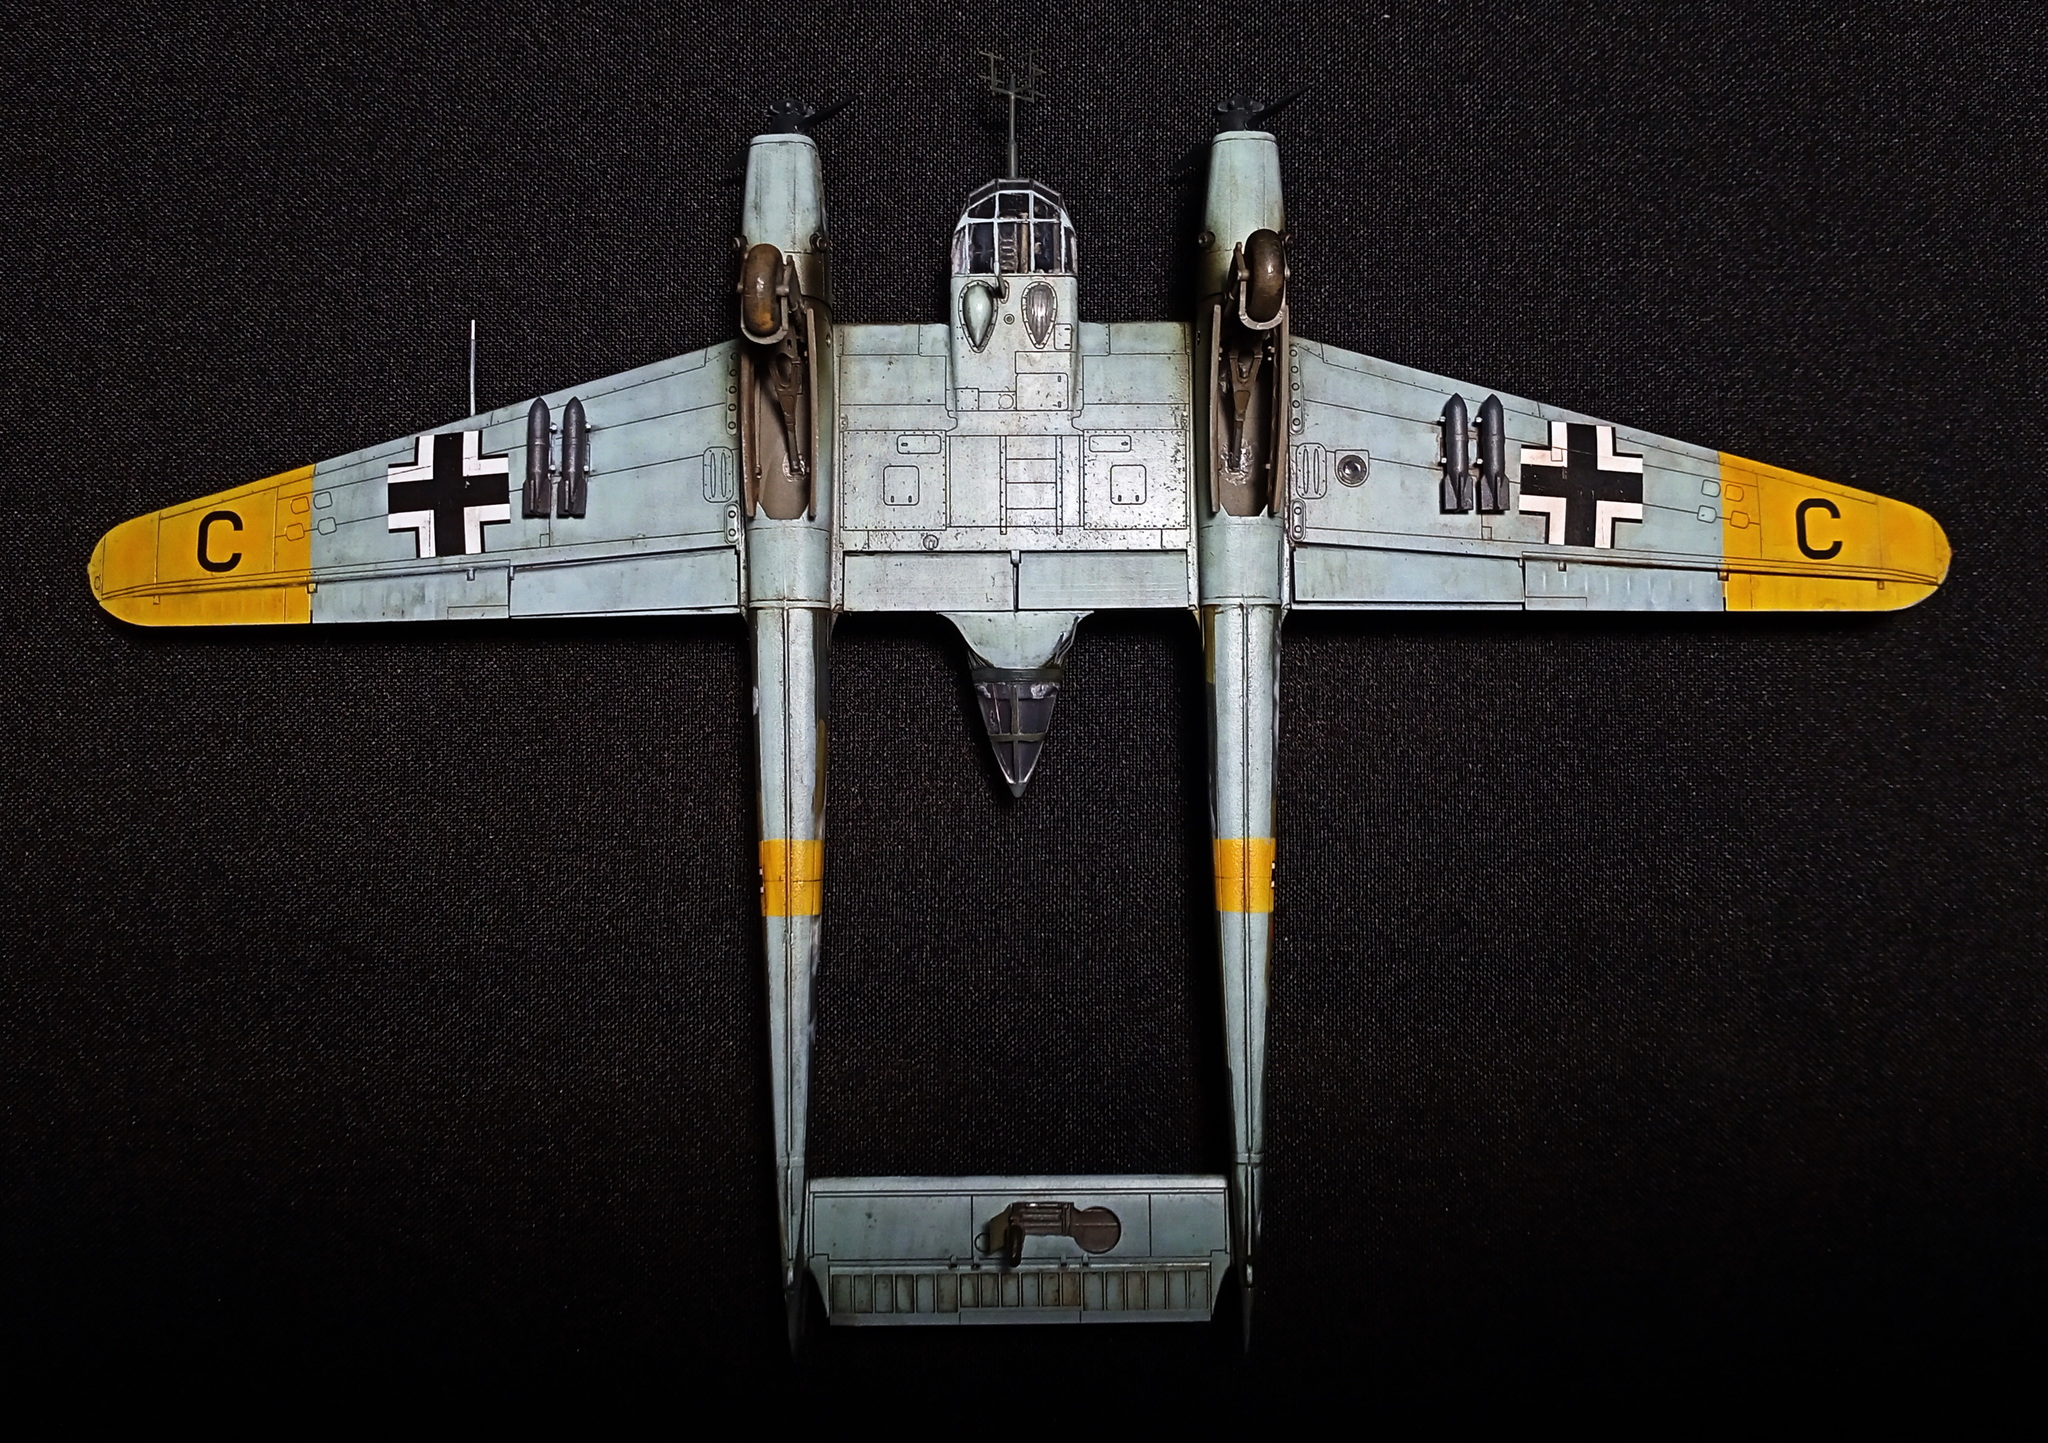 Sinister Rama. Focke-Wulf FW.189A-2 Uhu - My, Modeling, Stand modeling, Prefabricated model, Aircraft modeling, Hobby, Miniature, With your own hands, Needlework without process, Aviation, Story, Airplane, The Second World War, Bomber, Scale model, Collection, Collecting, Germany, Luftwaffe, Intelligence service, Scout, Video, Longpost